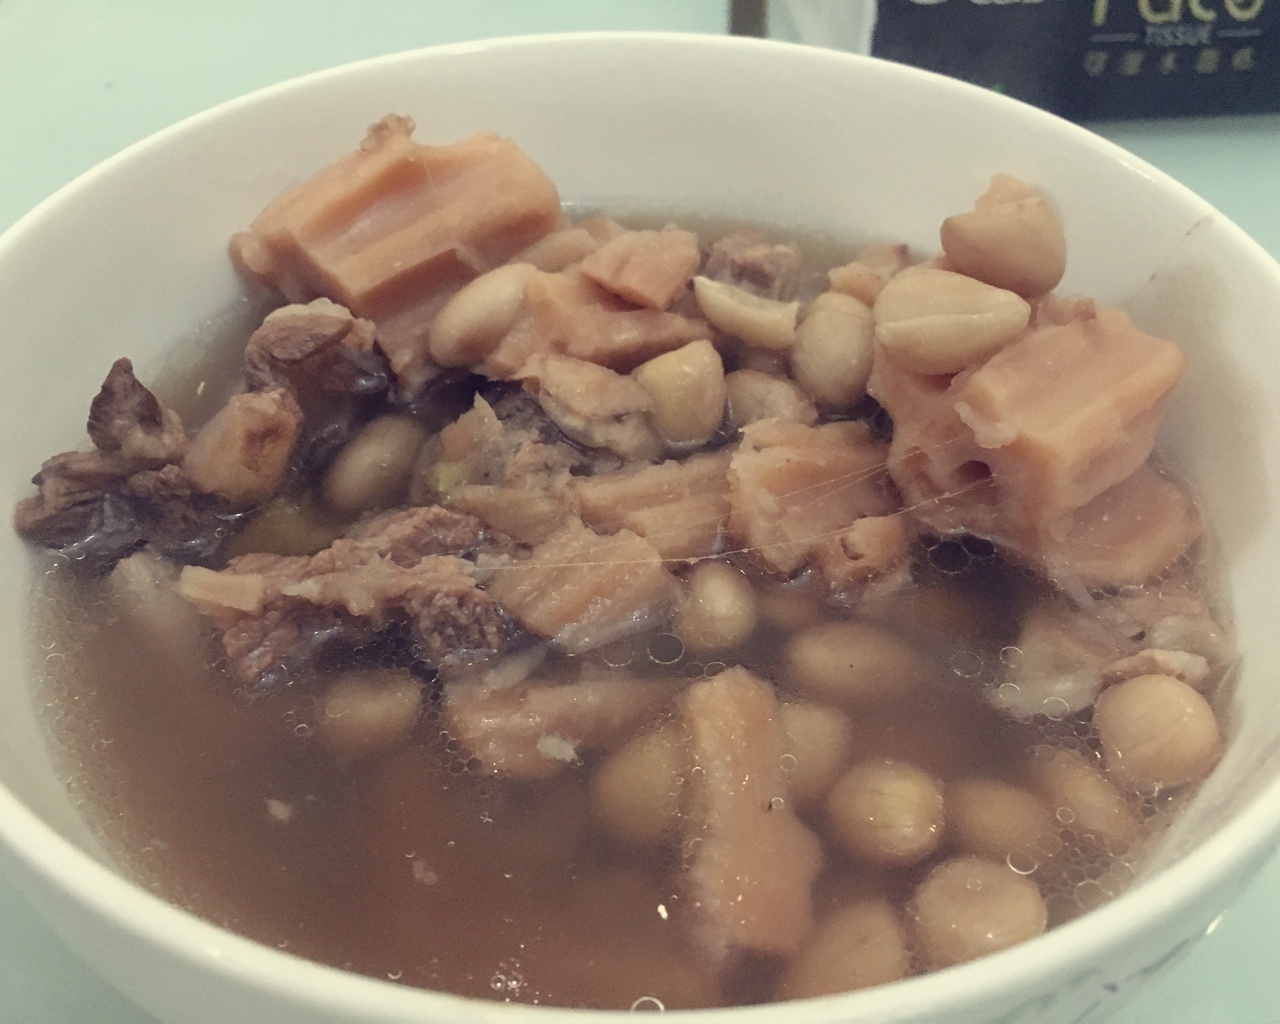 
Soup of chop of lotus lotus root, boil the practice that was over